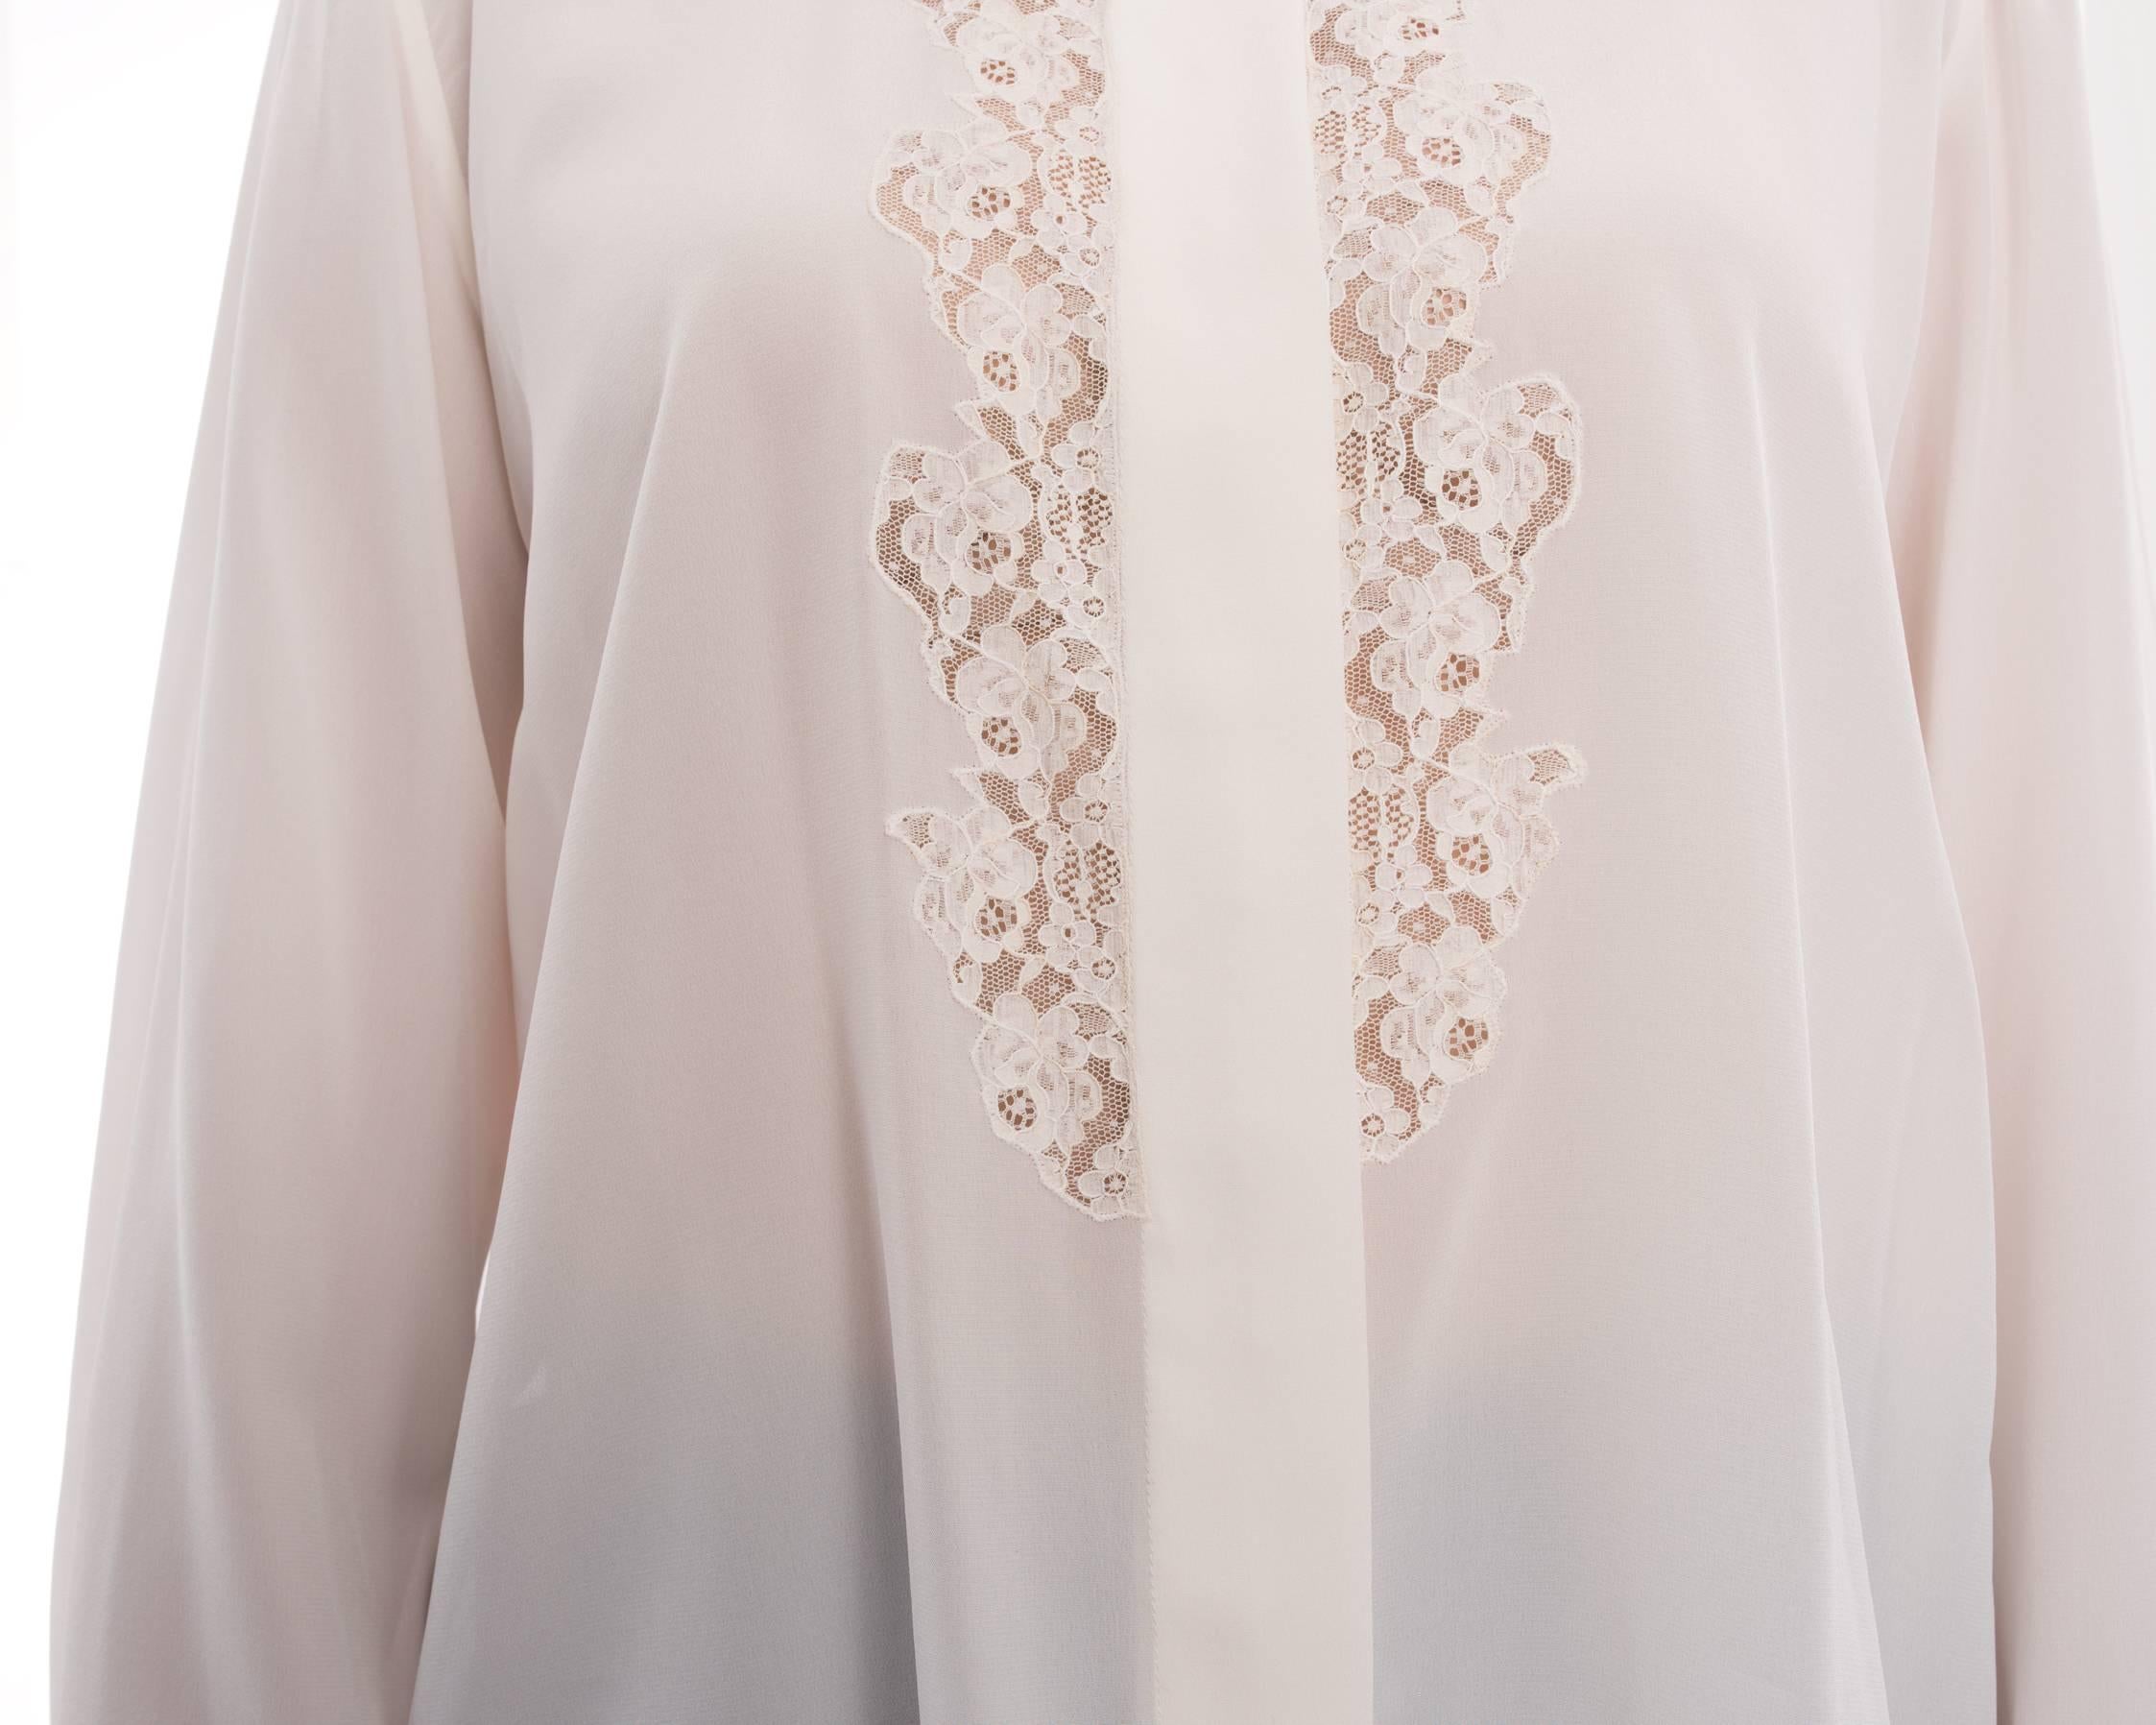 Chloe Milk White Silk Blouse with Lace Inset.    Hidden buttons down centre front, french cuffs, lace inset detail. Marked size FR40 (USA 8). Garment bust measures 40” and is recommended to be worn by 35-36” bust person.  Garment hip measures 45”